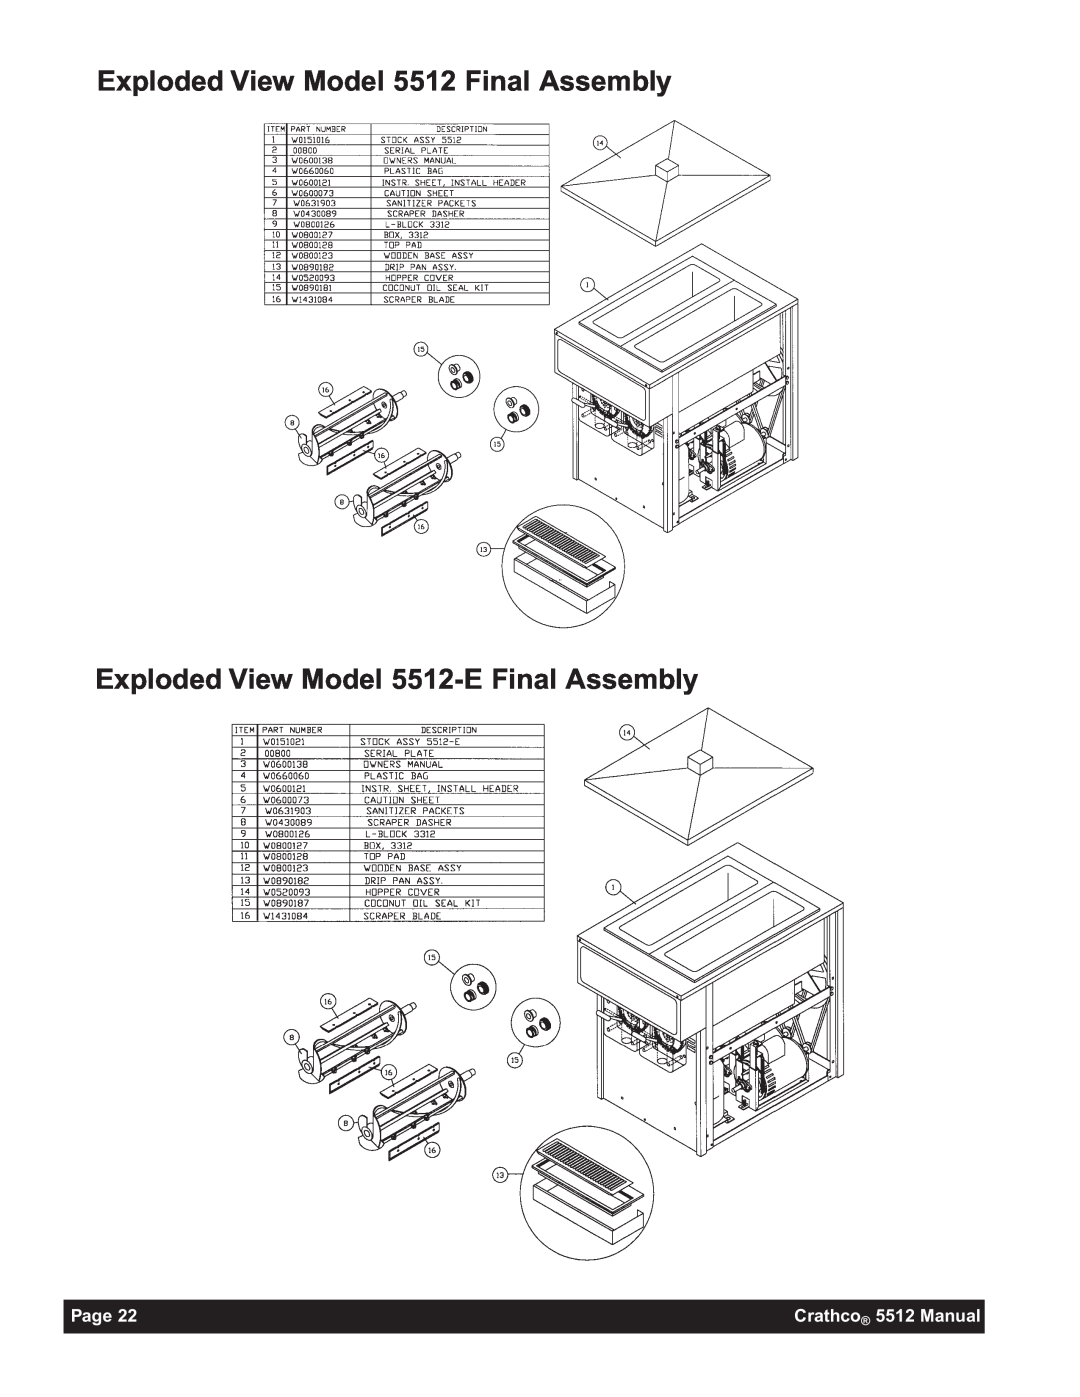 Grindmaster 5512E Exploded View Model 5512 Final Assembly, Exploded View Model 5512-E Final Assembly, Page 